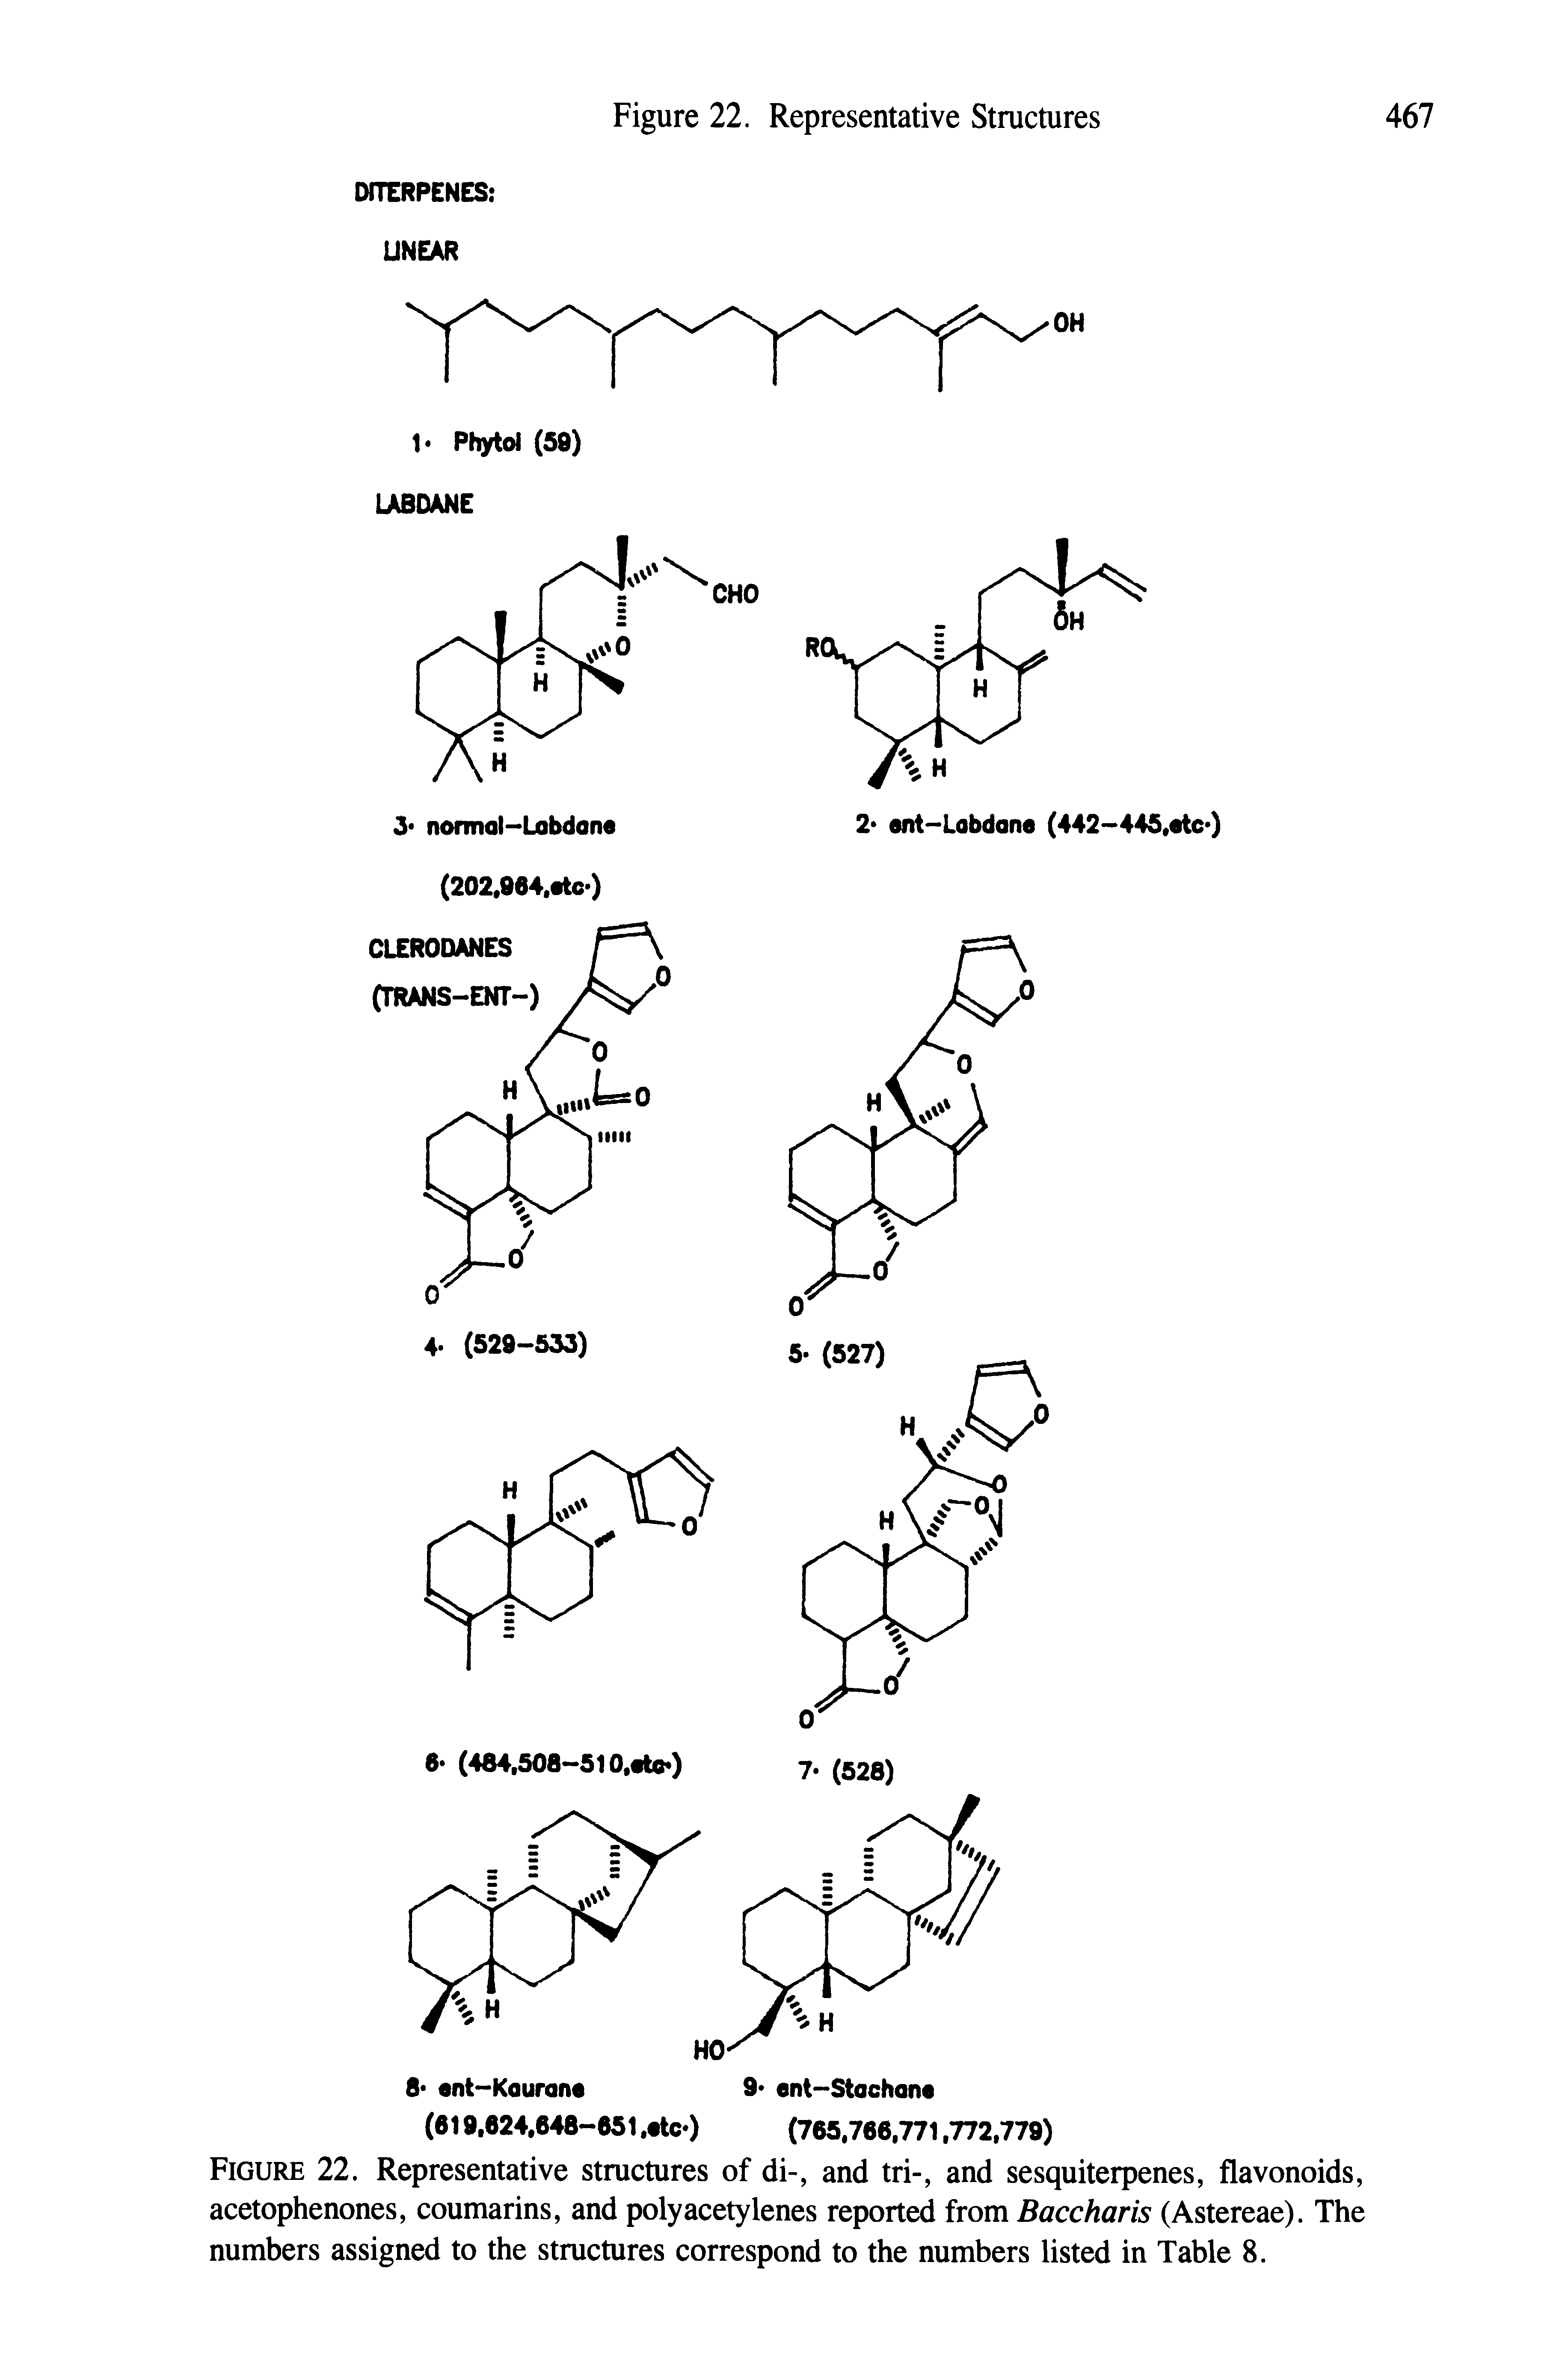 Figure 22. Representative structures of di-, and tri-, and sesquiterpenes, flavonoids, acetophenones, coumarins, and poly acetylenes reported from Baccharis (Astereae). The numbers assigned to the structures correspond to the numbers listed in Table 8.